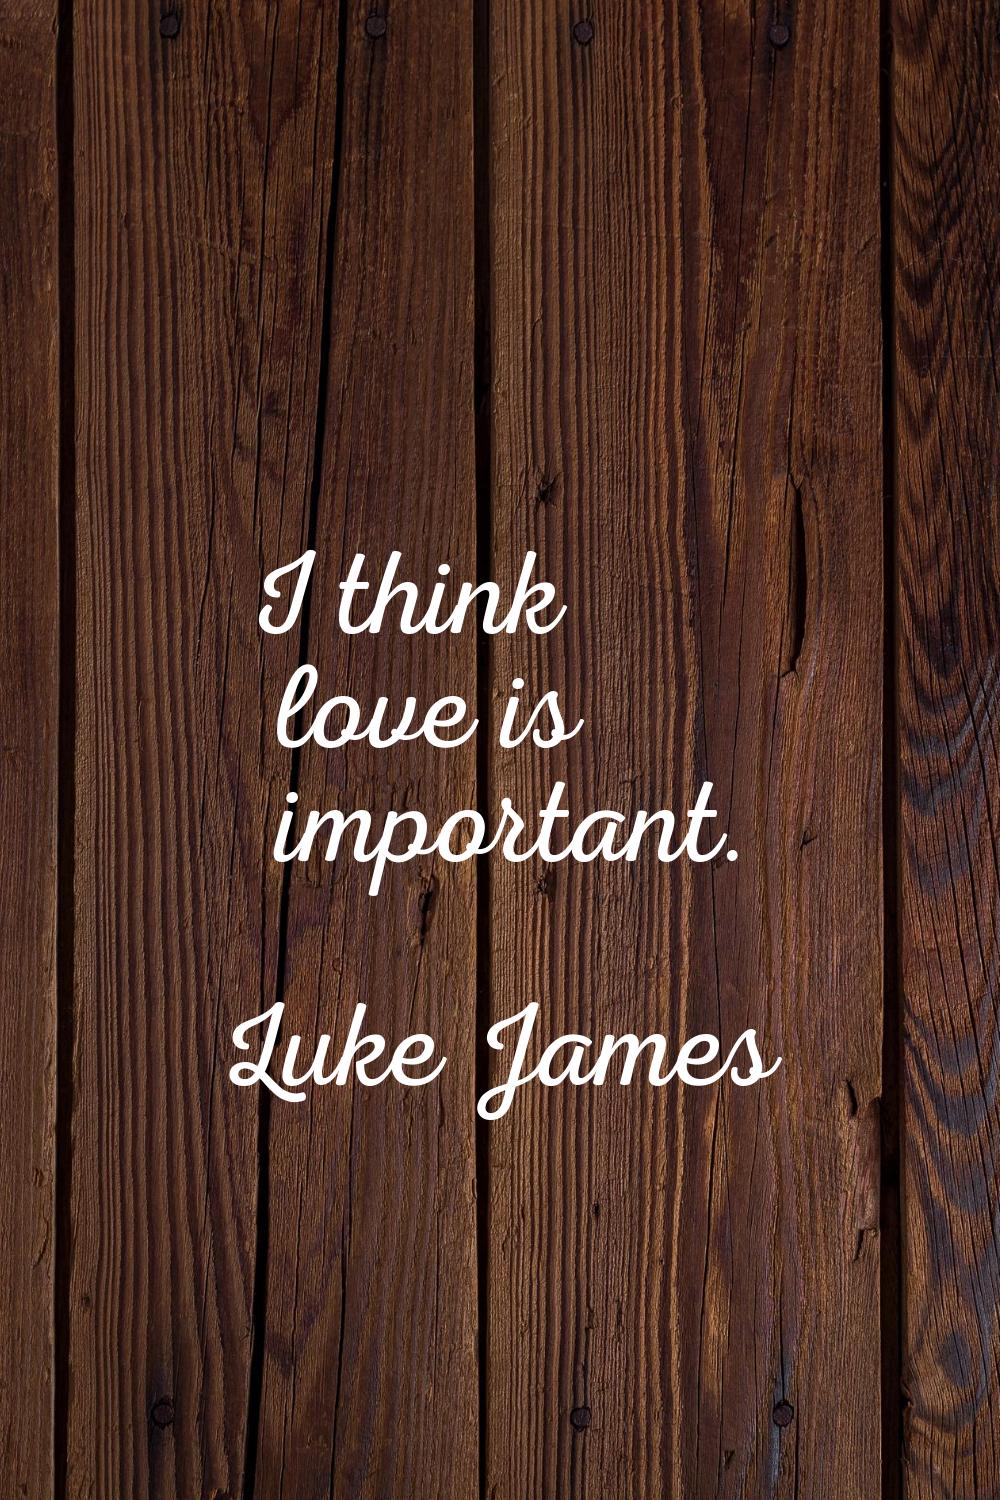 I think love is important.